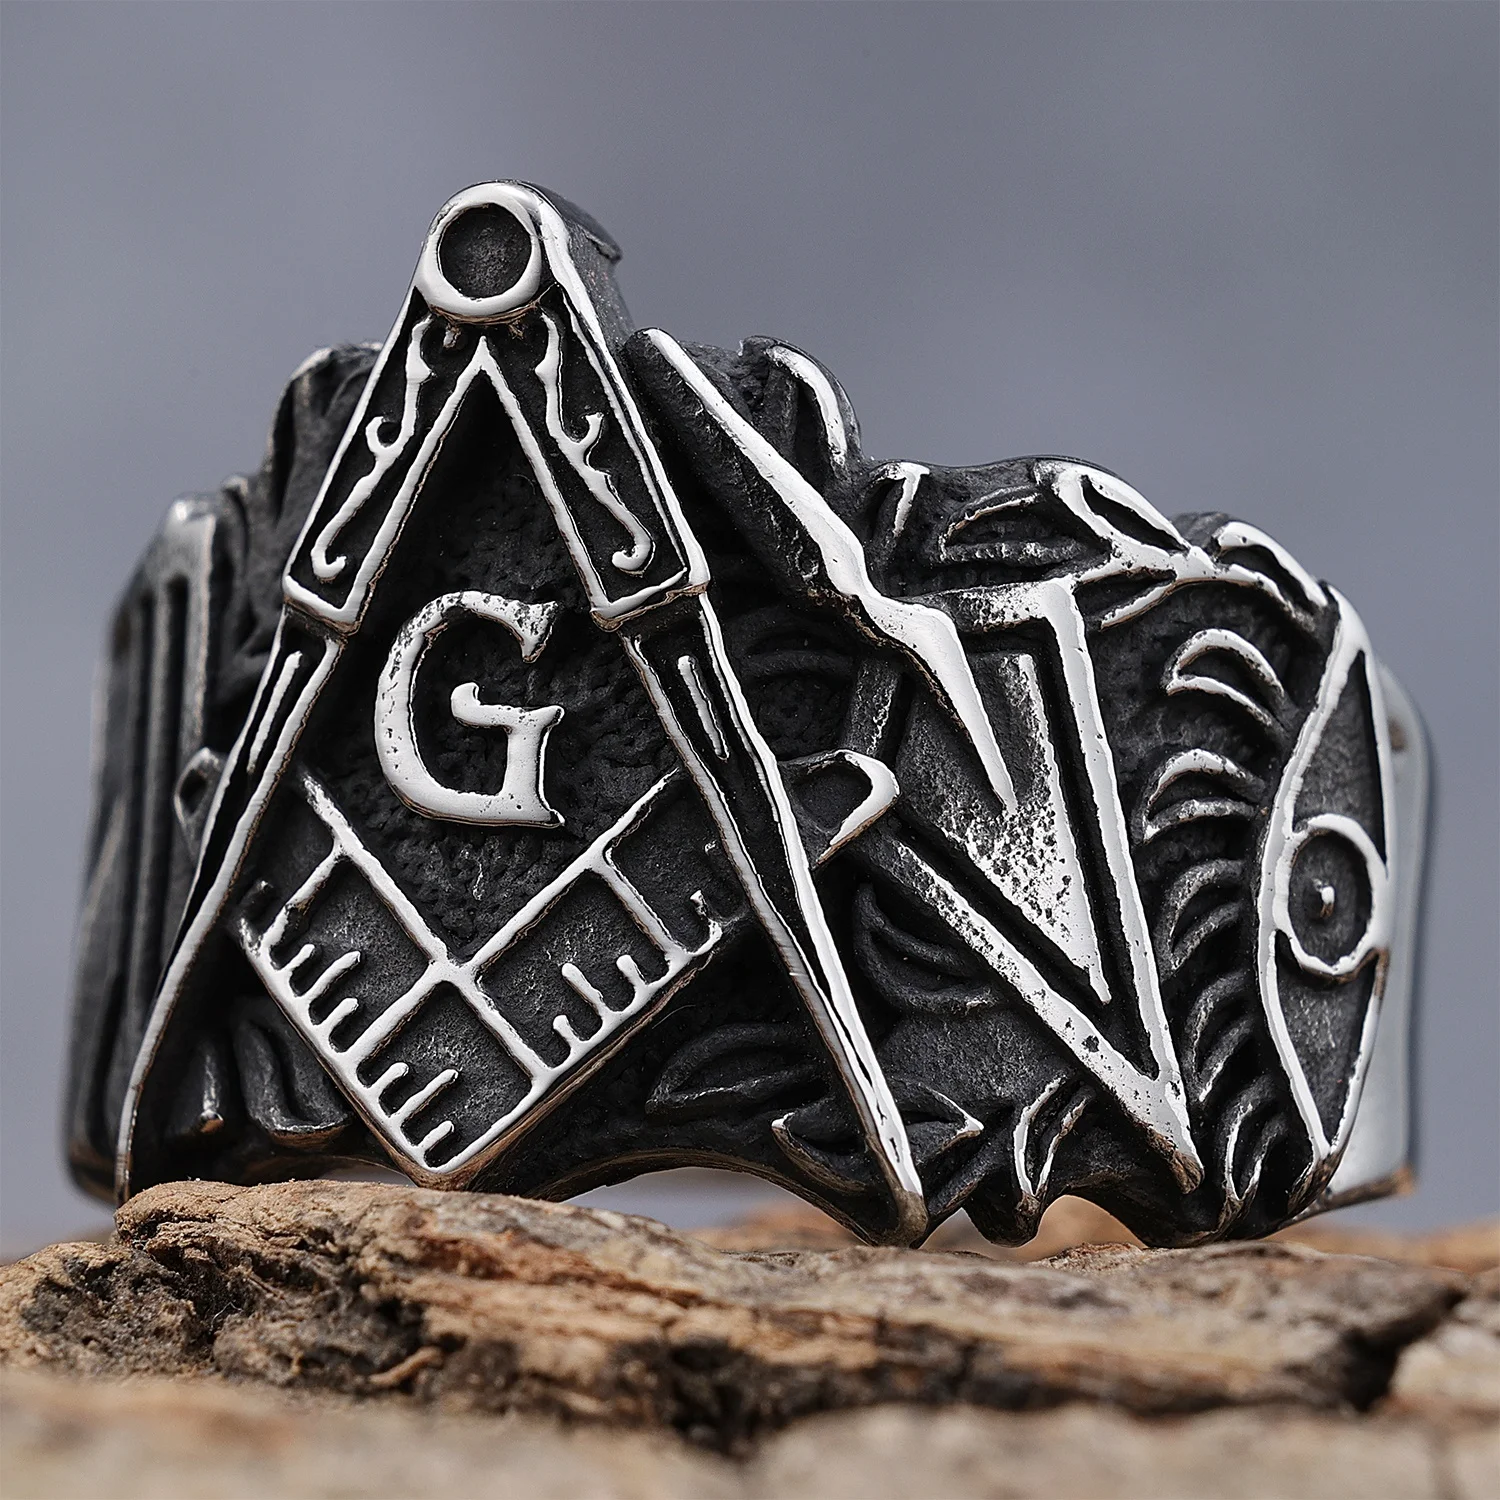 

Vintage Masonic Ring Stainless Steel Jewelry Religion Solid Back Freemason Signet Rings for Men Gift